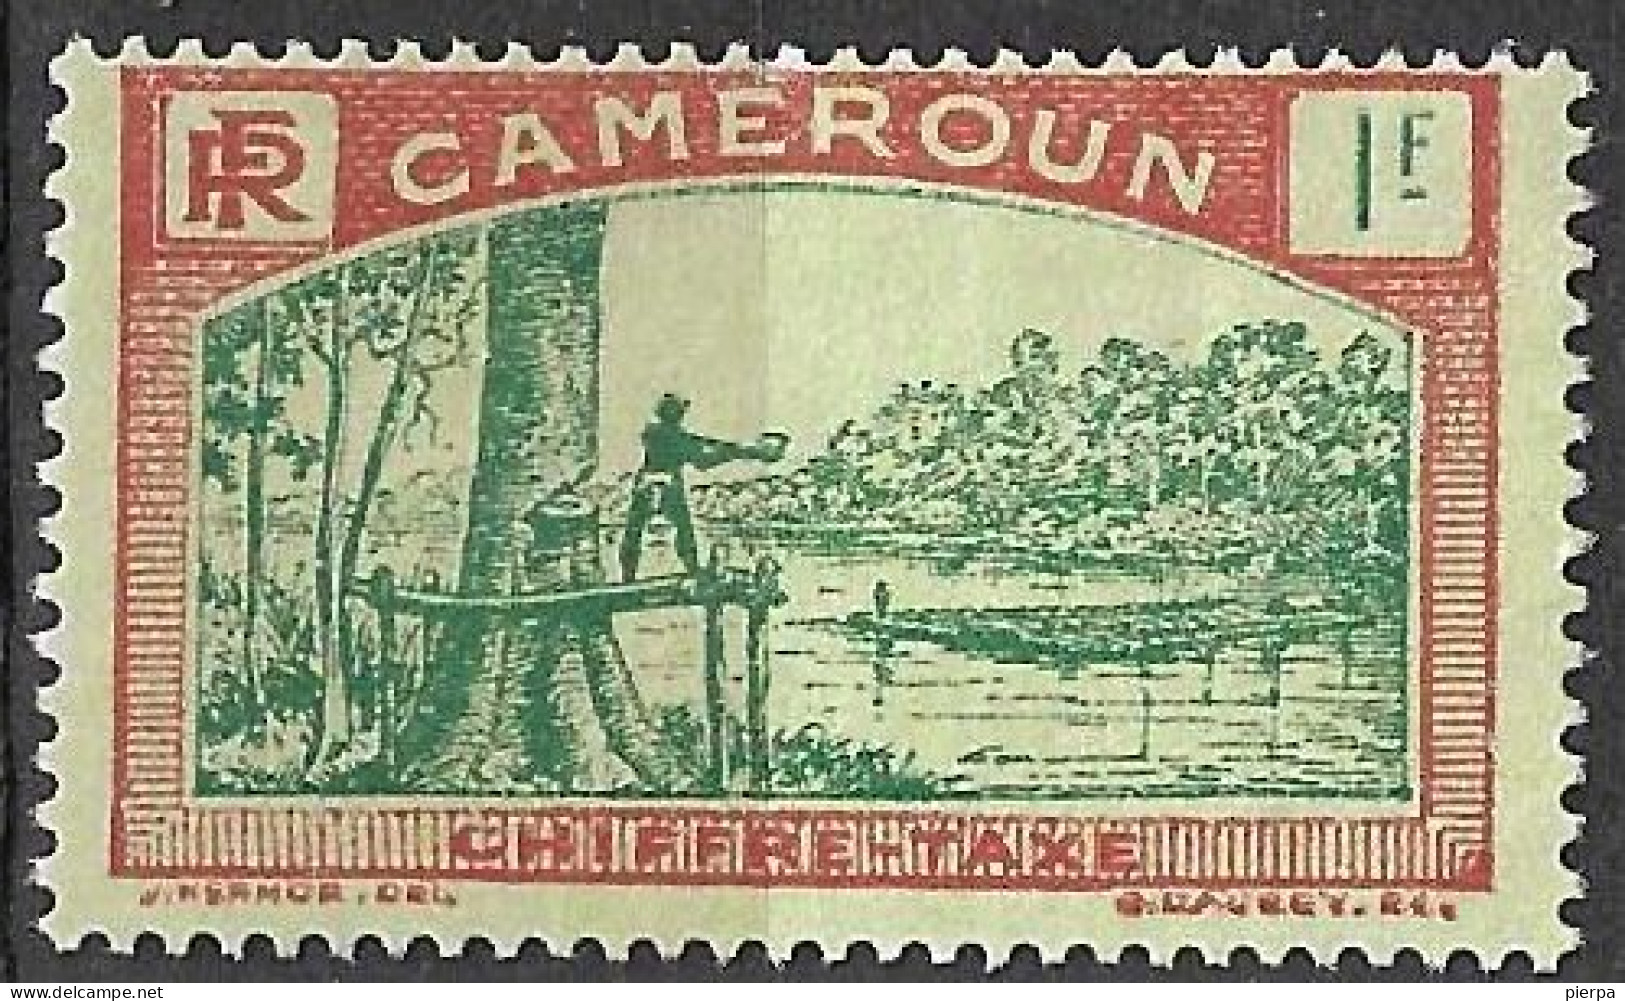 CAMEROUN FRANCESE - 1925 - TIMBRETAXE - 1 FR.  - MINT WITHOUT GUM (YVERT TX11- MICHEL 11) - Used Stamps